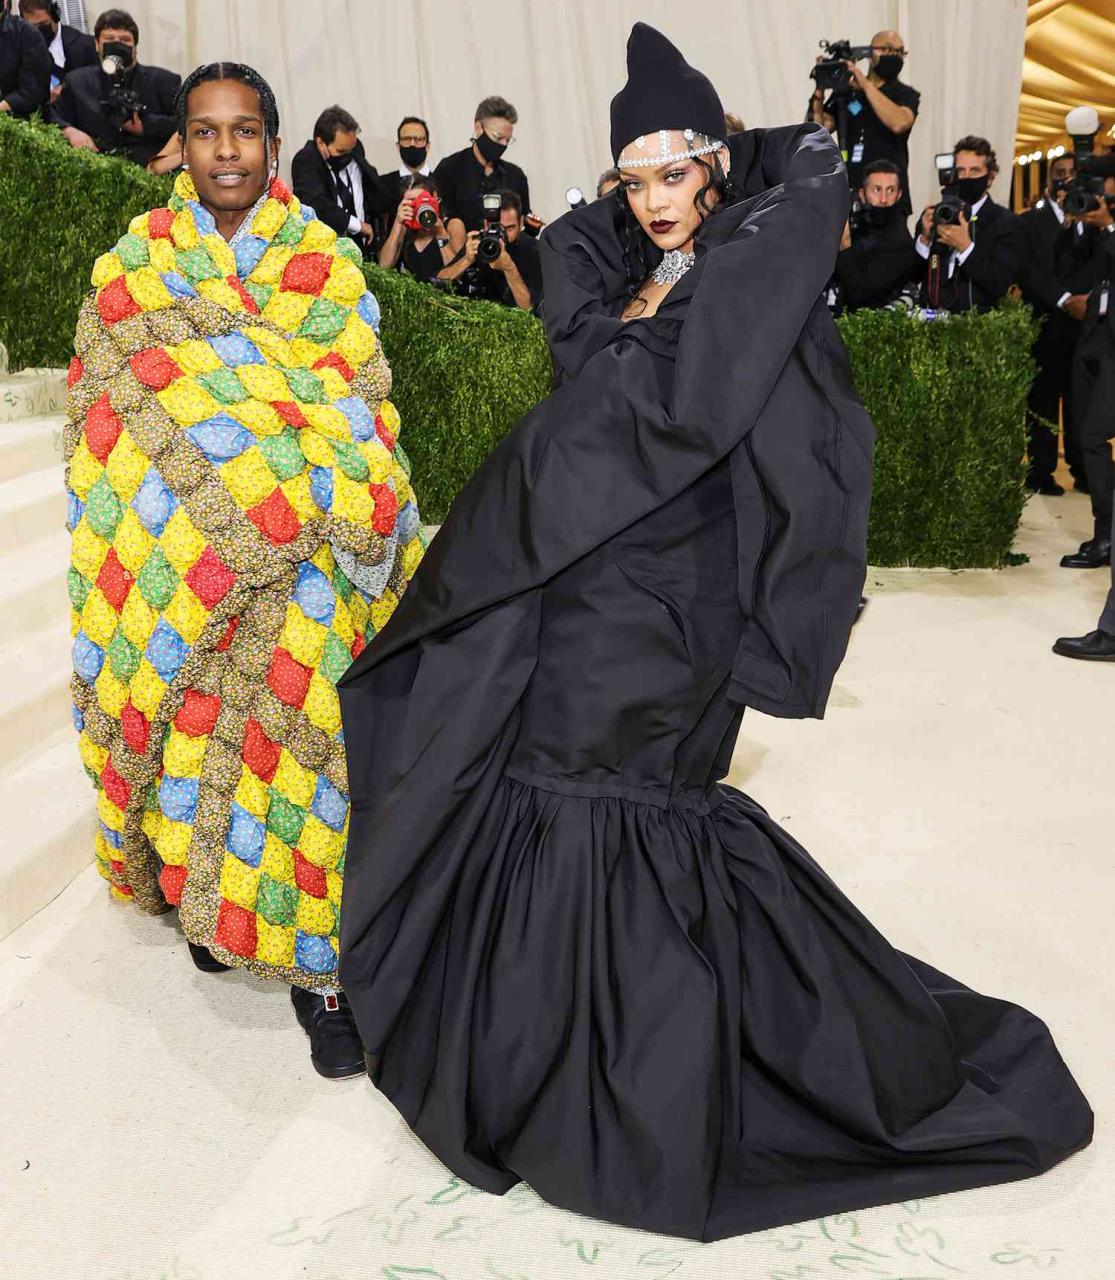 Rihanna And A$Ap Rocky Make Their Red Carpet Debut At 2021 Met Gala